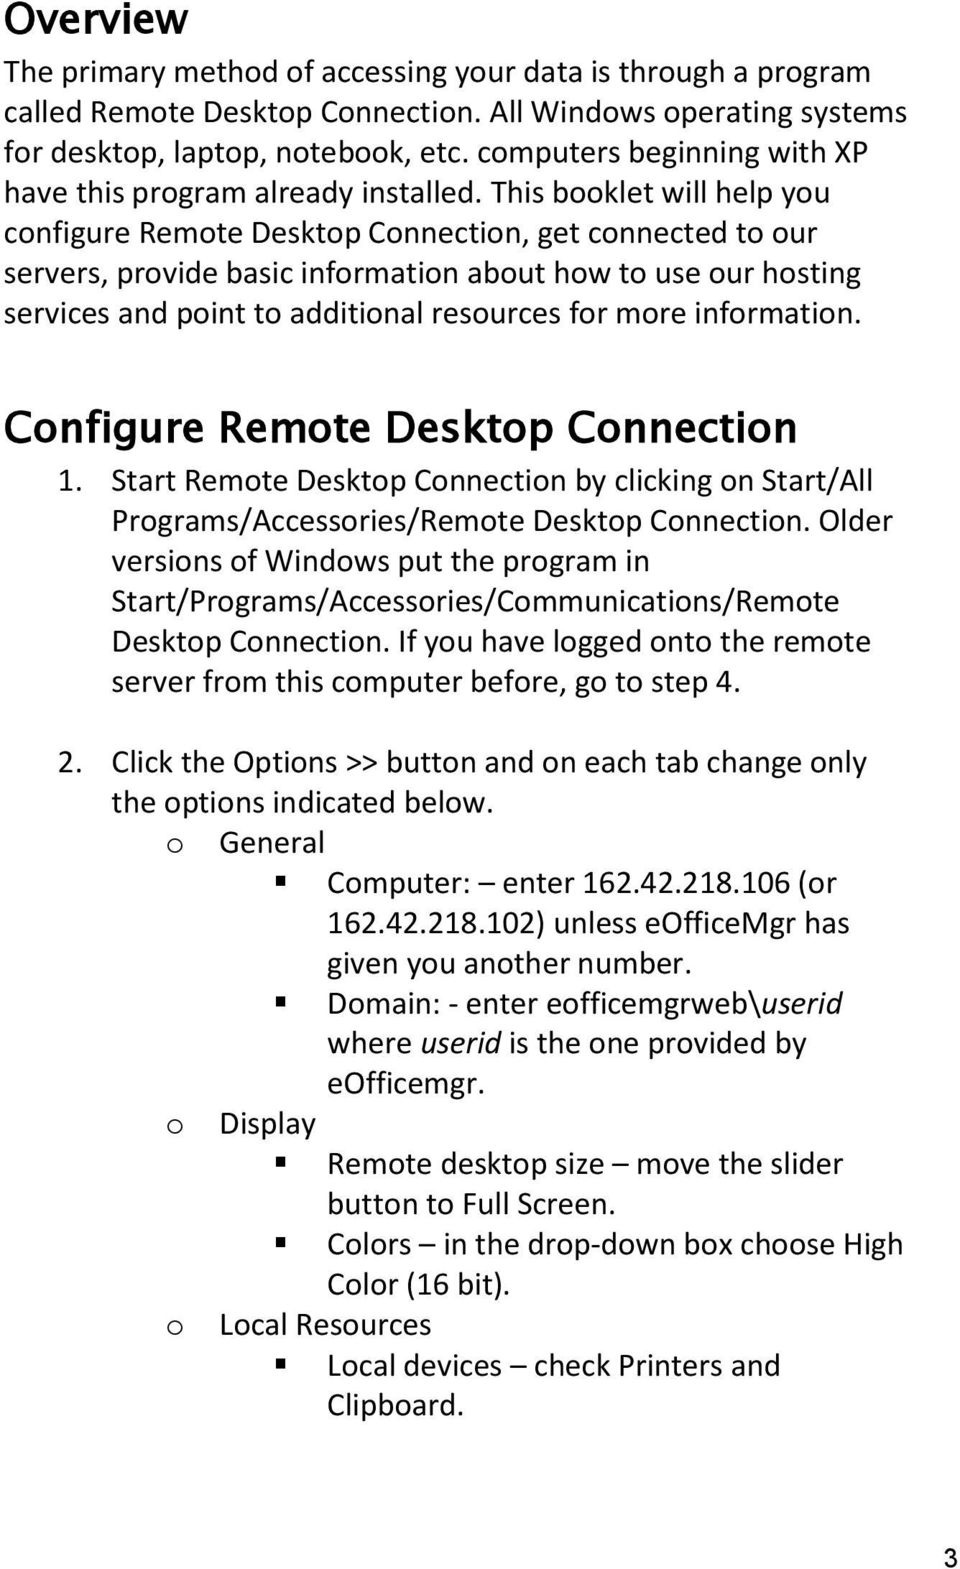 This booklet will help you configure Remote Desktop Connection, get connected to our servers, provide basic information about how to use our hosting services and point to additional resources for